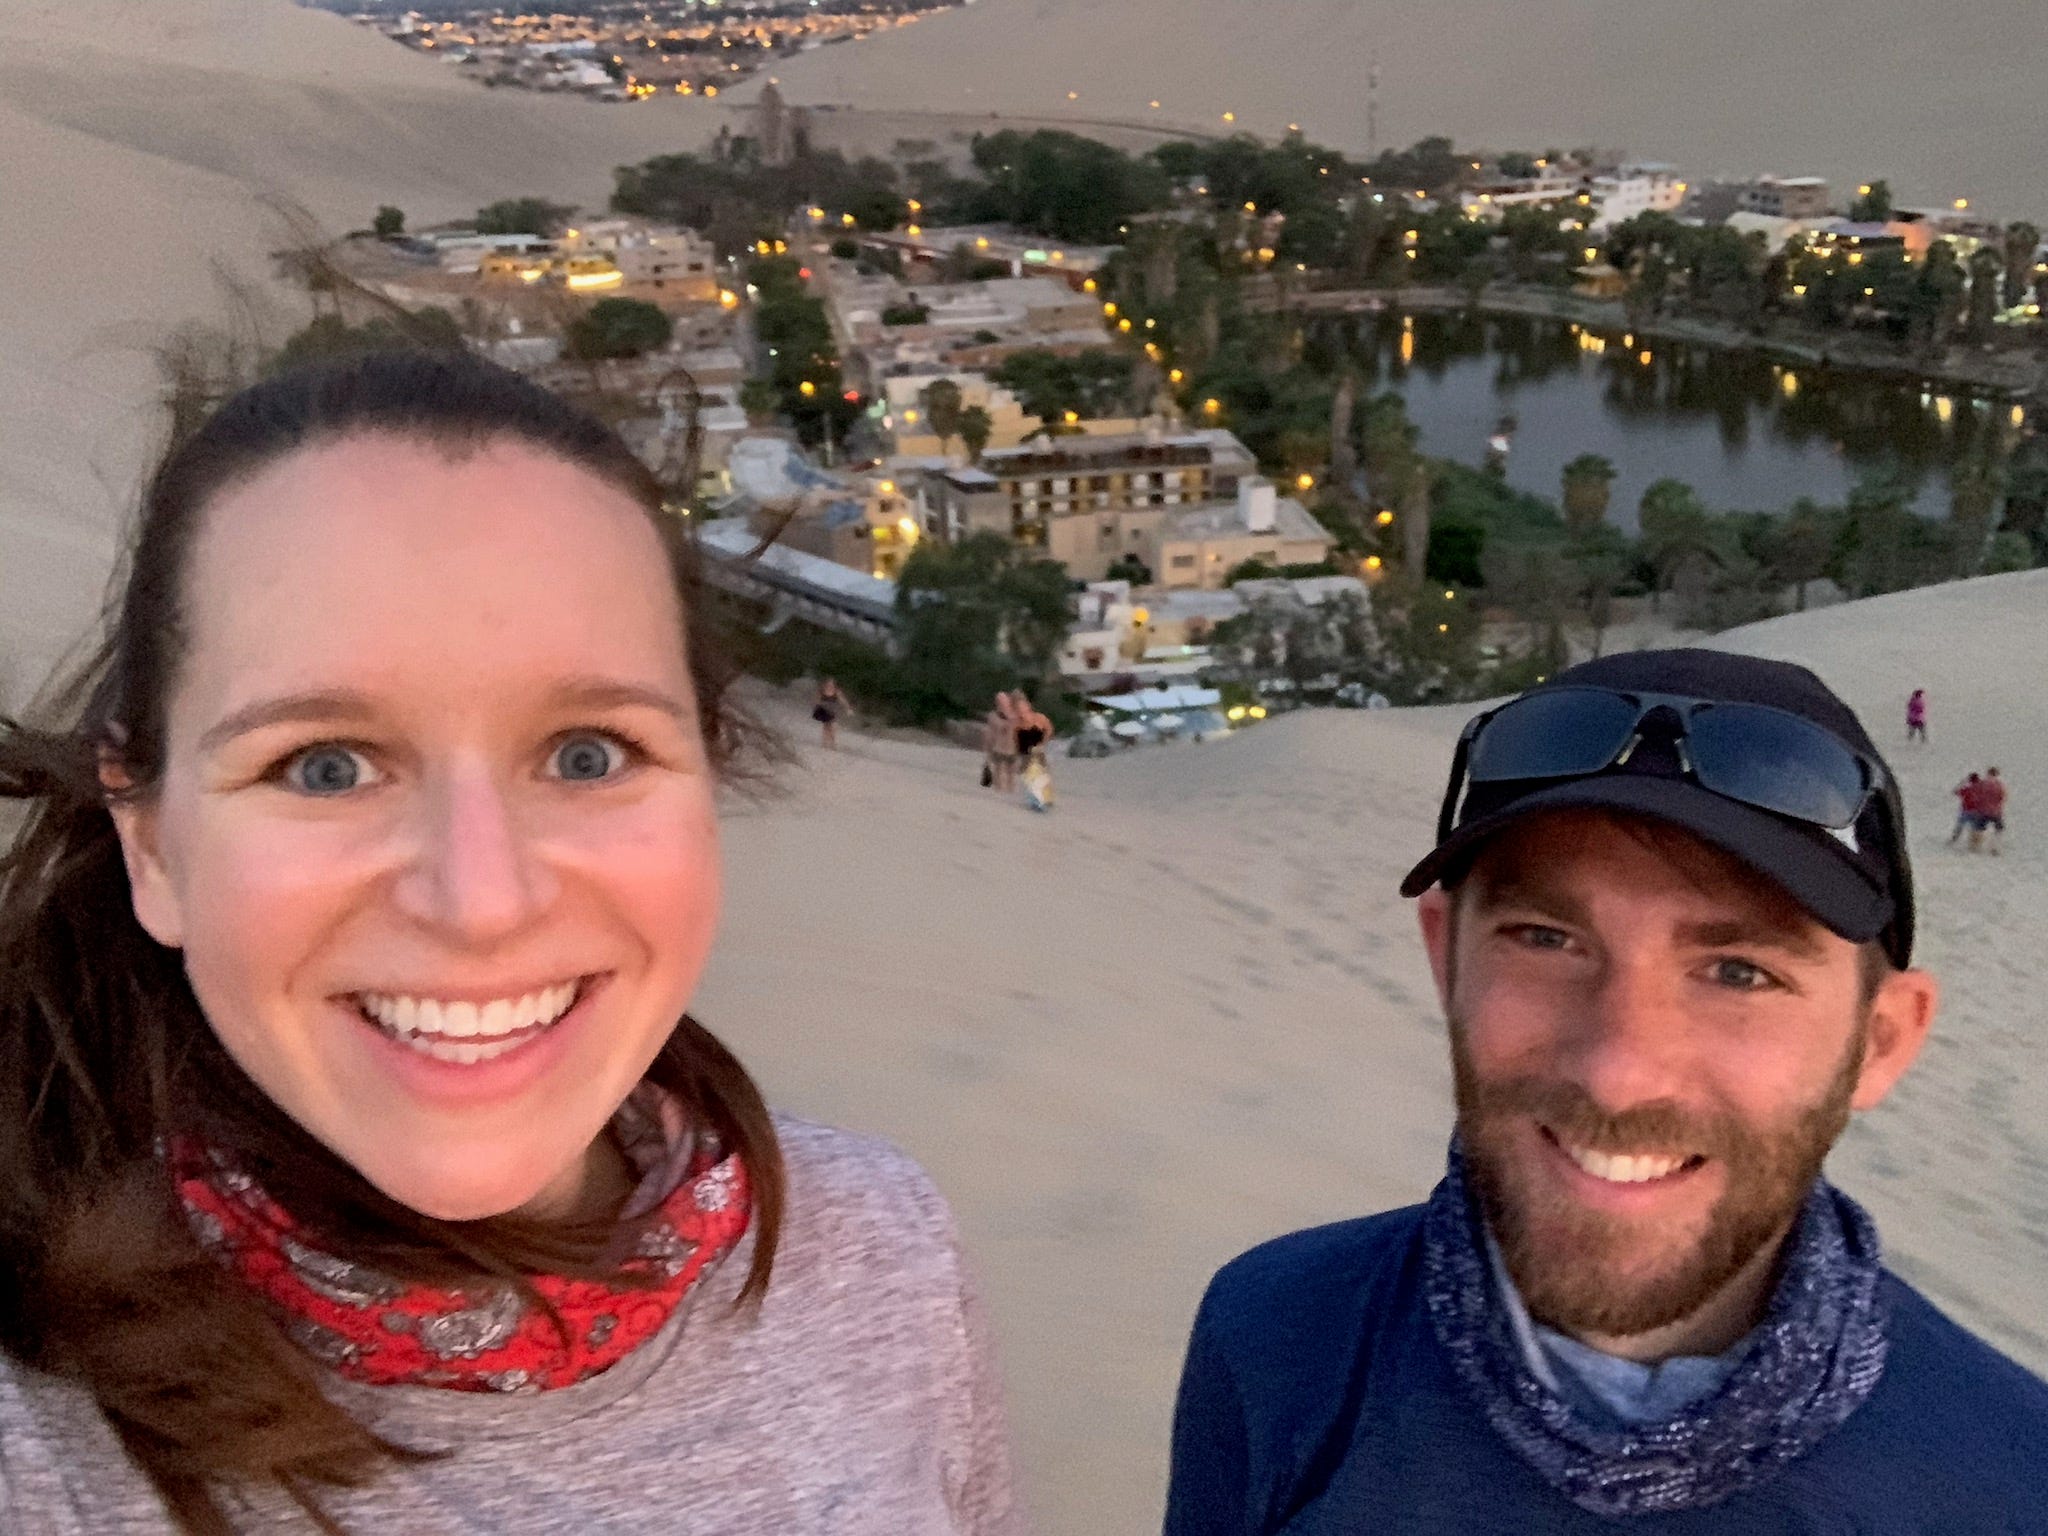 Jonathan and Melissa Robbins, Nashville residents, traveled to Peru on vacation in mid-May. Now, they're stuck in Cusco, a historic mountain town, with no idea when they will be able to get home. Before learning of the national lockdown and heading into quarantine in a Cusco hotel, the pair visited a desert resort in Huacachina, pictured.